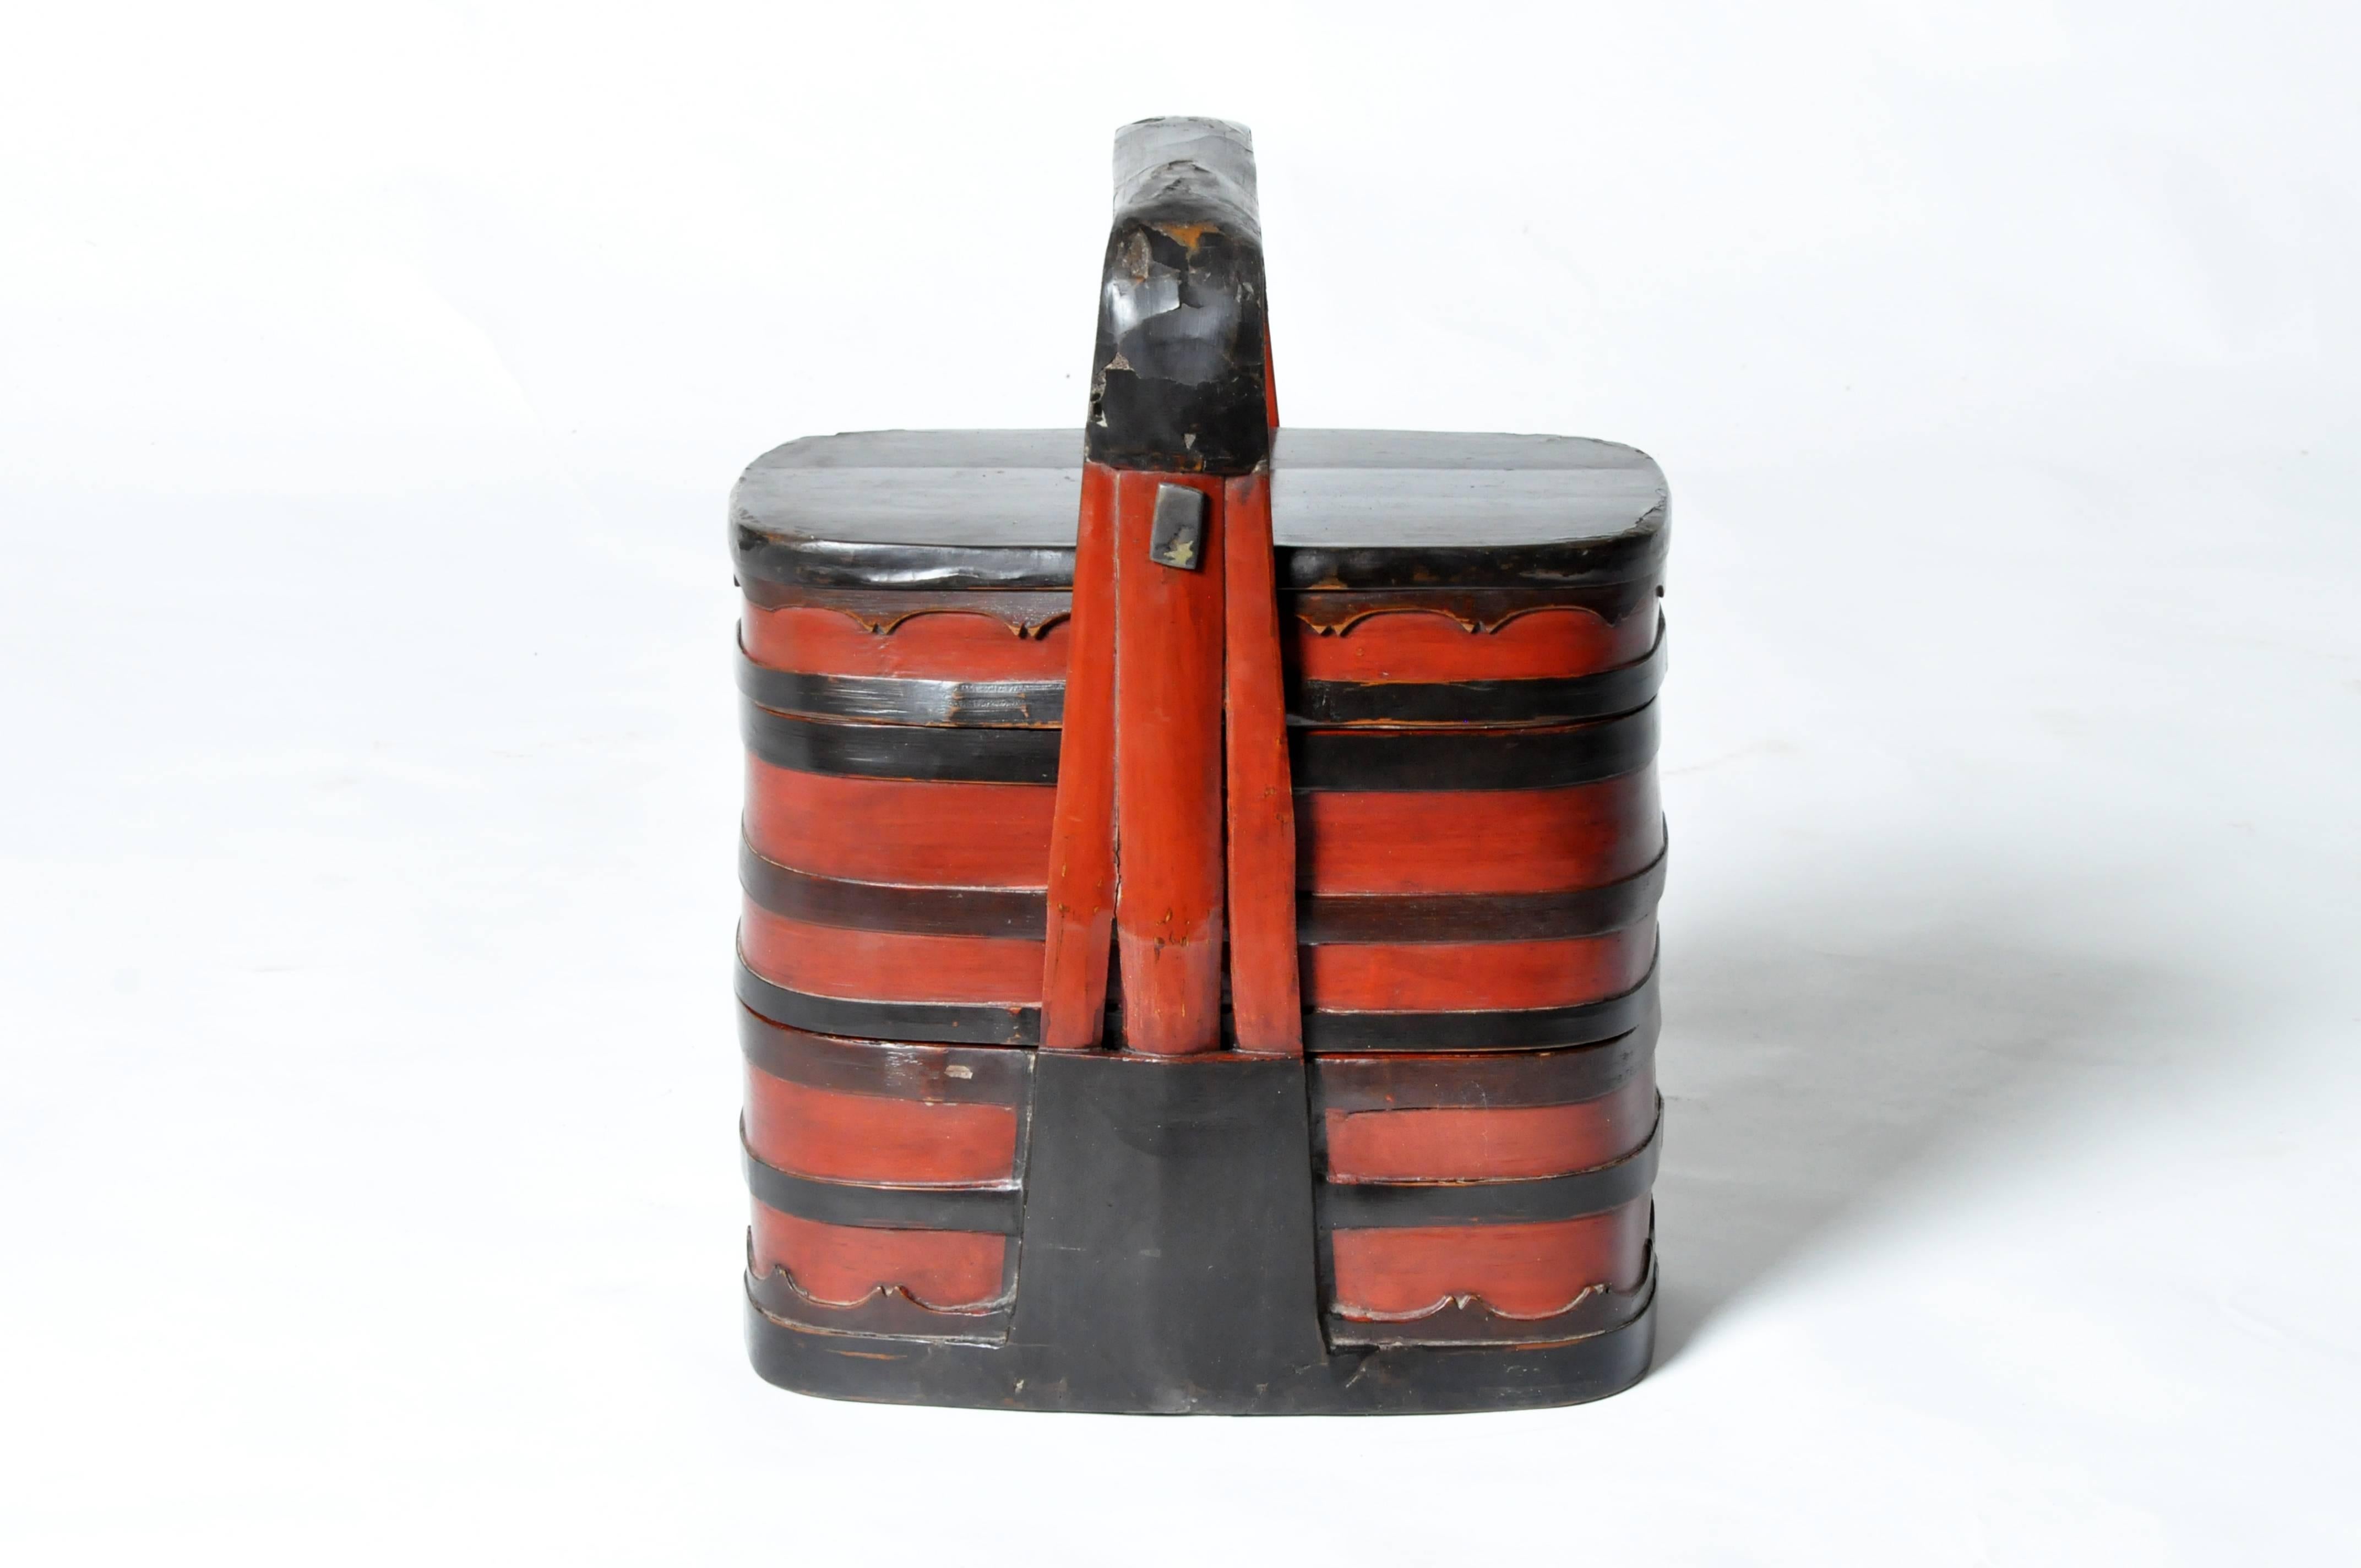 This Chinese food carrier is from Fujian, China and made from lacquered bamboo.